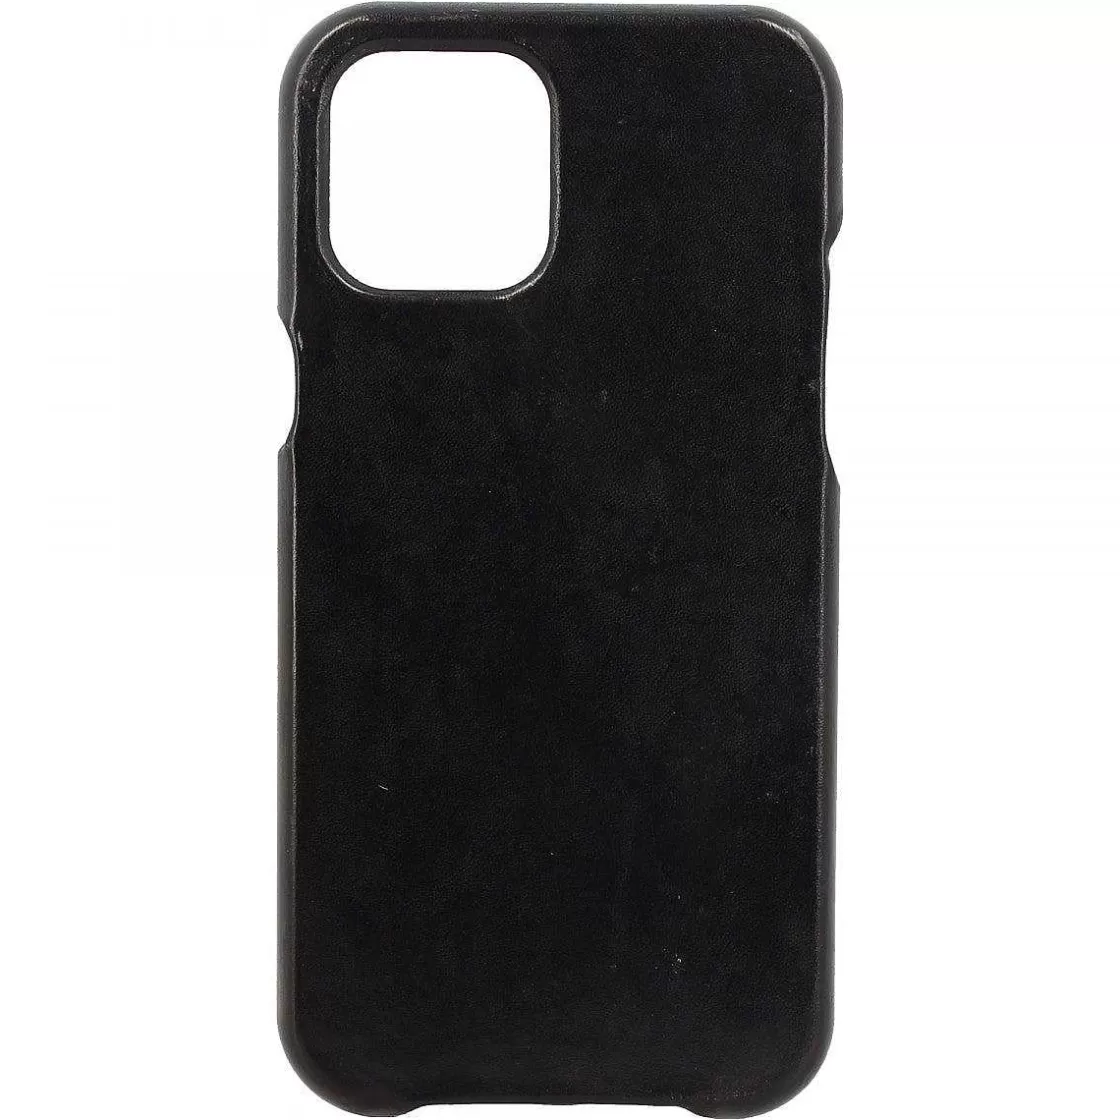 Leonardo Iphone Cover In Hand-Buffered Black Leather Sale